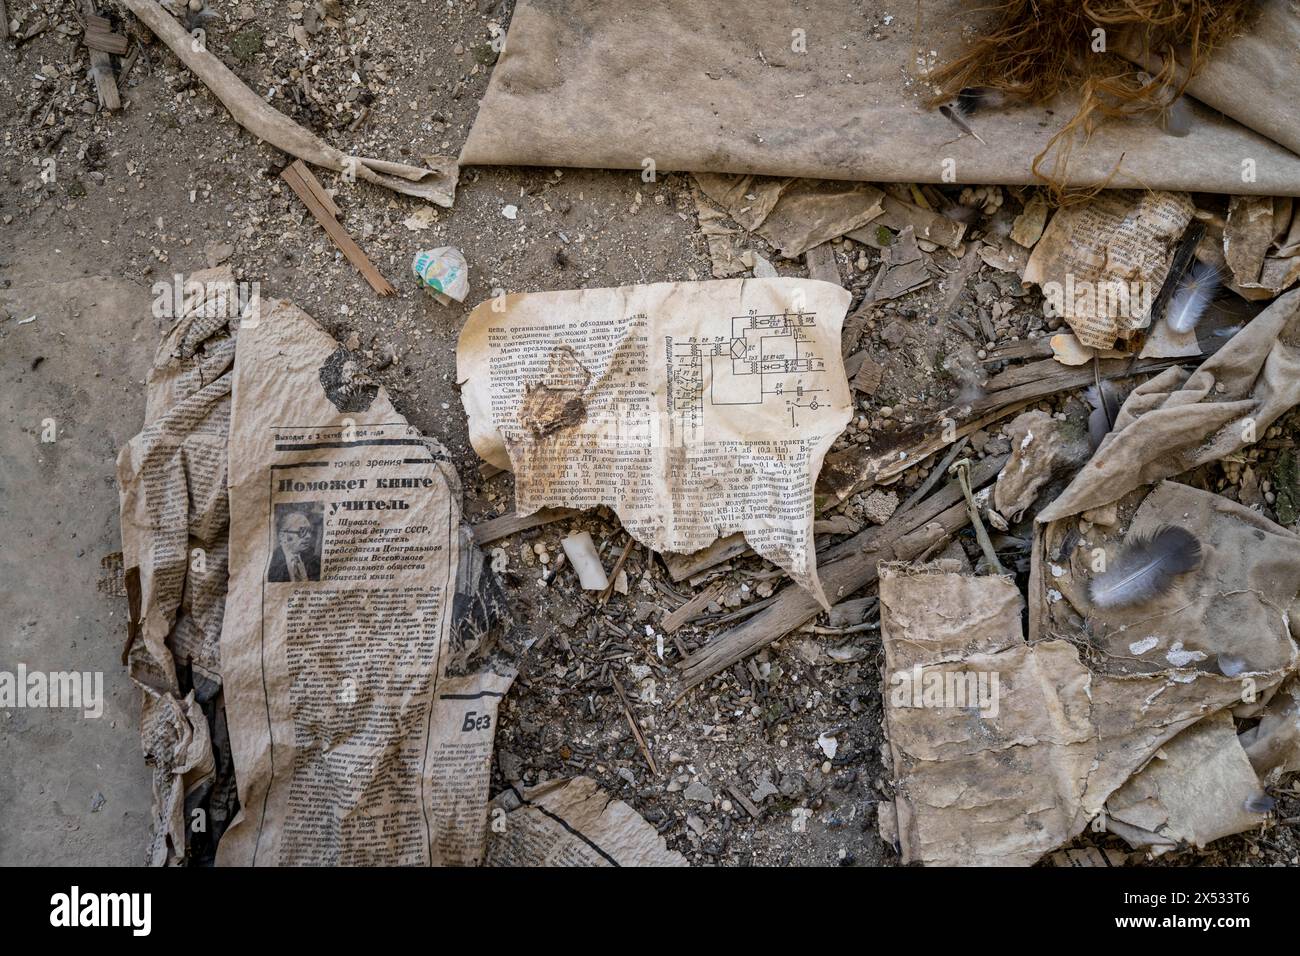 Remains of an old Kyrgyz newspaper from 1924 and an instruction manual with circuit diagram in Cyrillic script in an abandoned building, ghost town Stock Photo